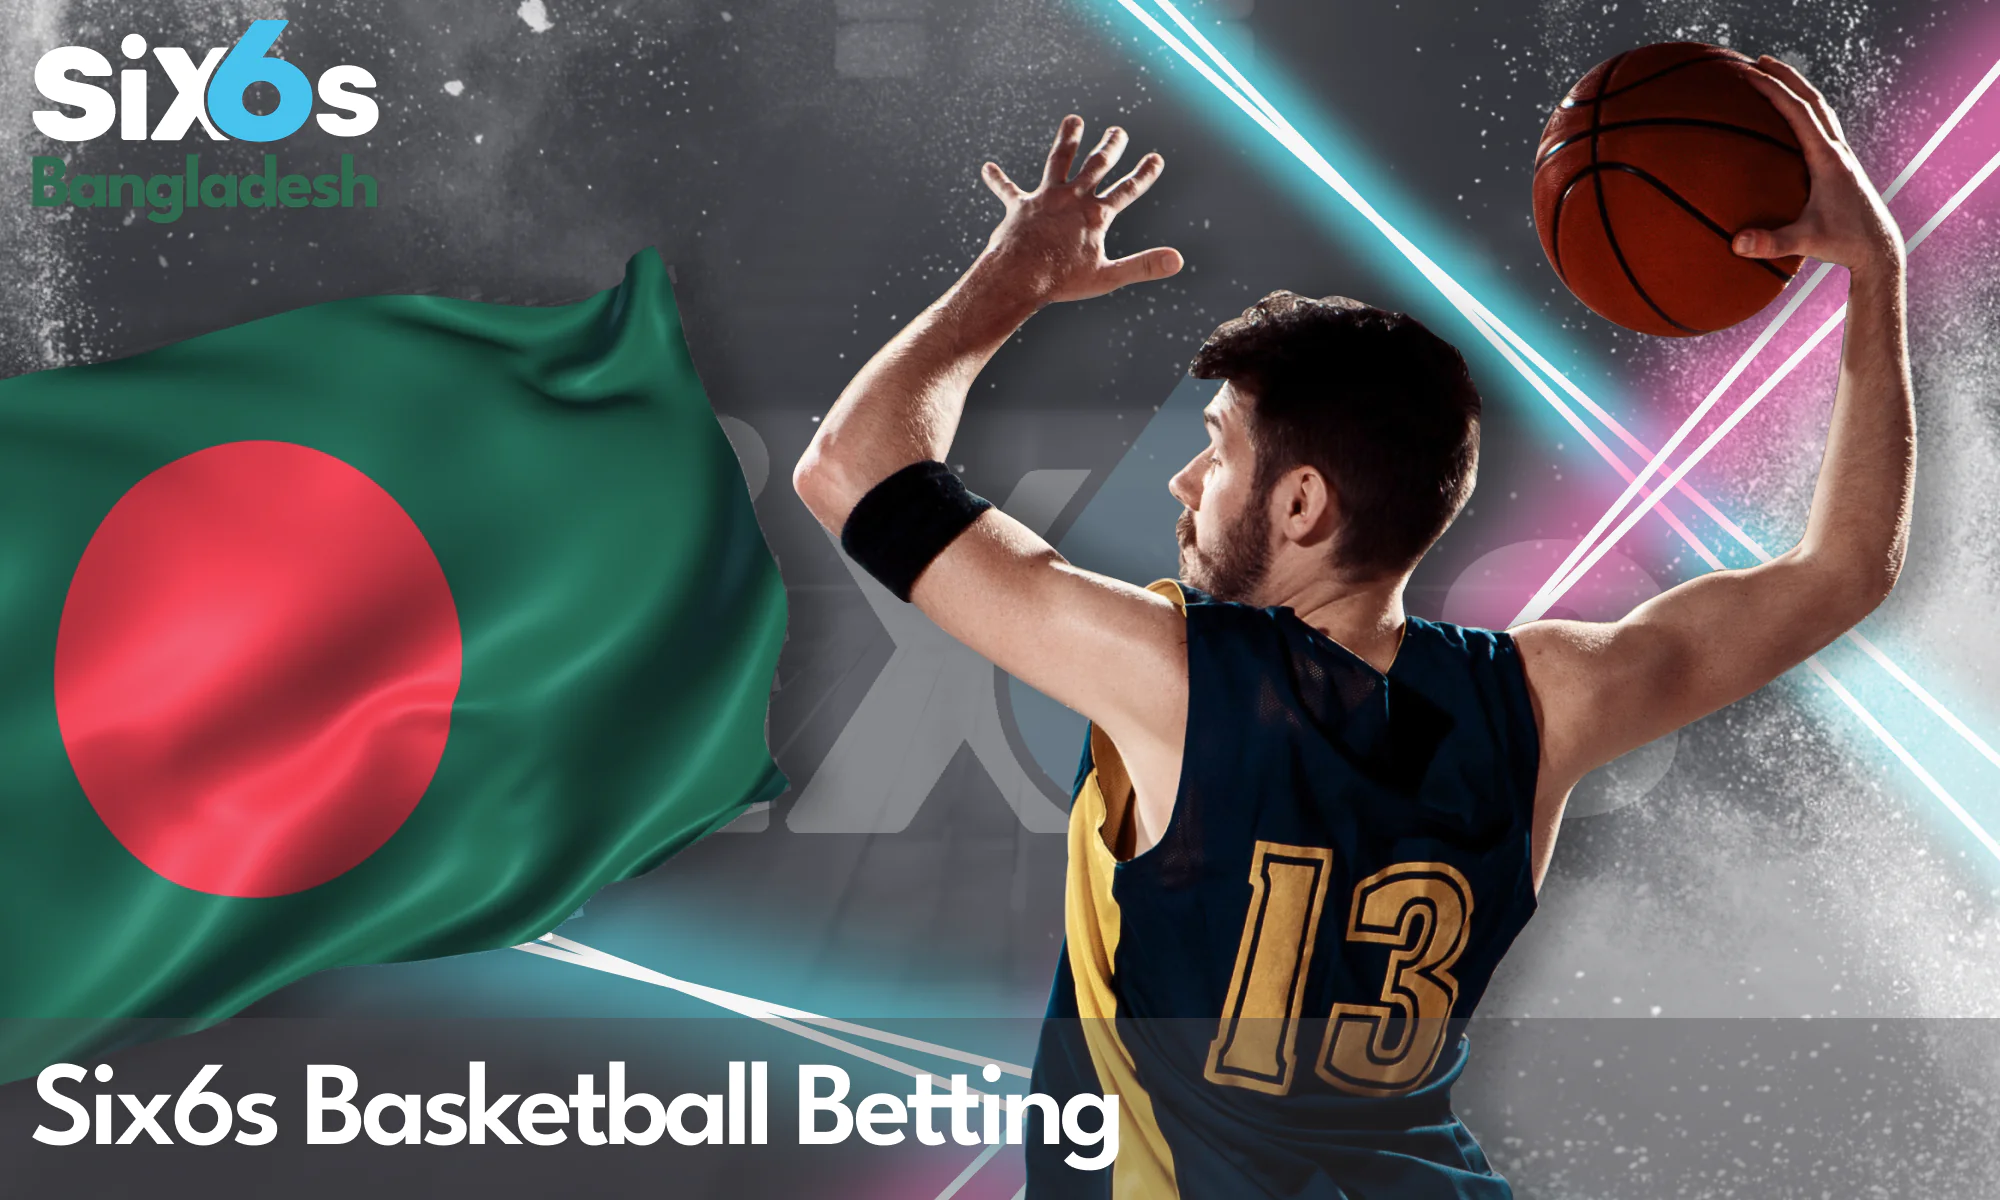 Basketball betting for players from Bangladesh - Six6s